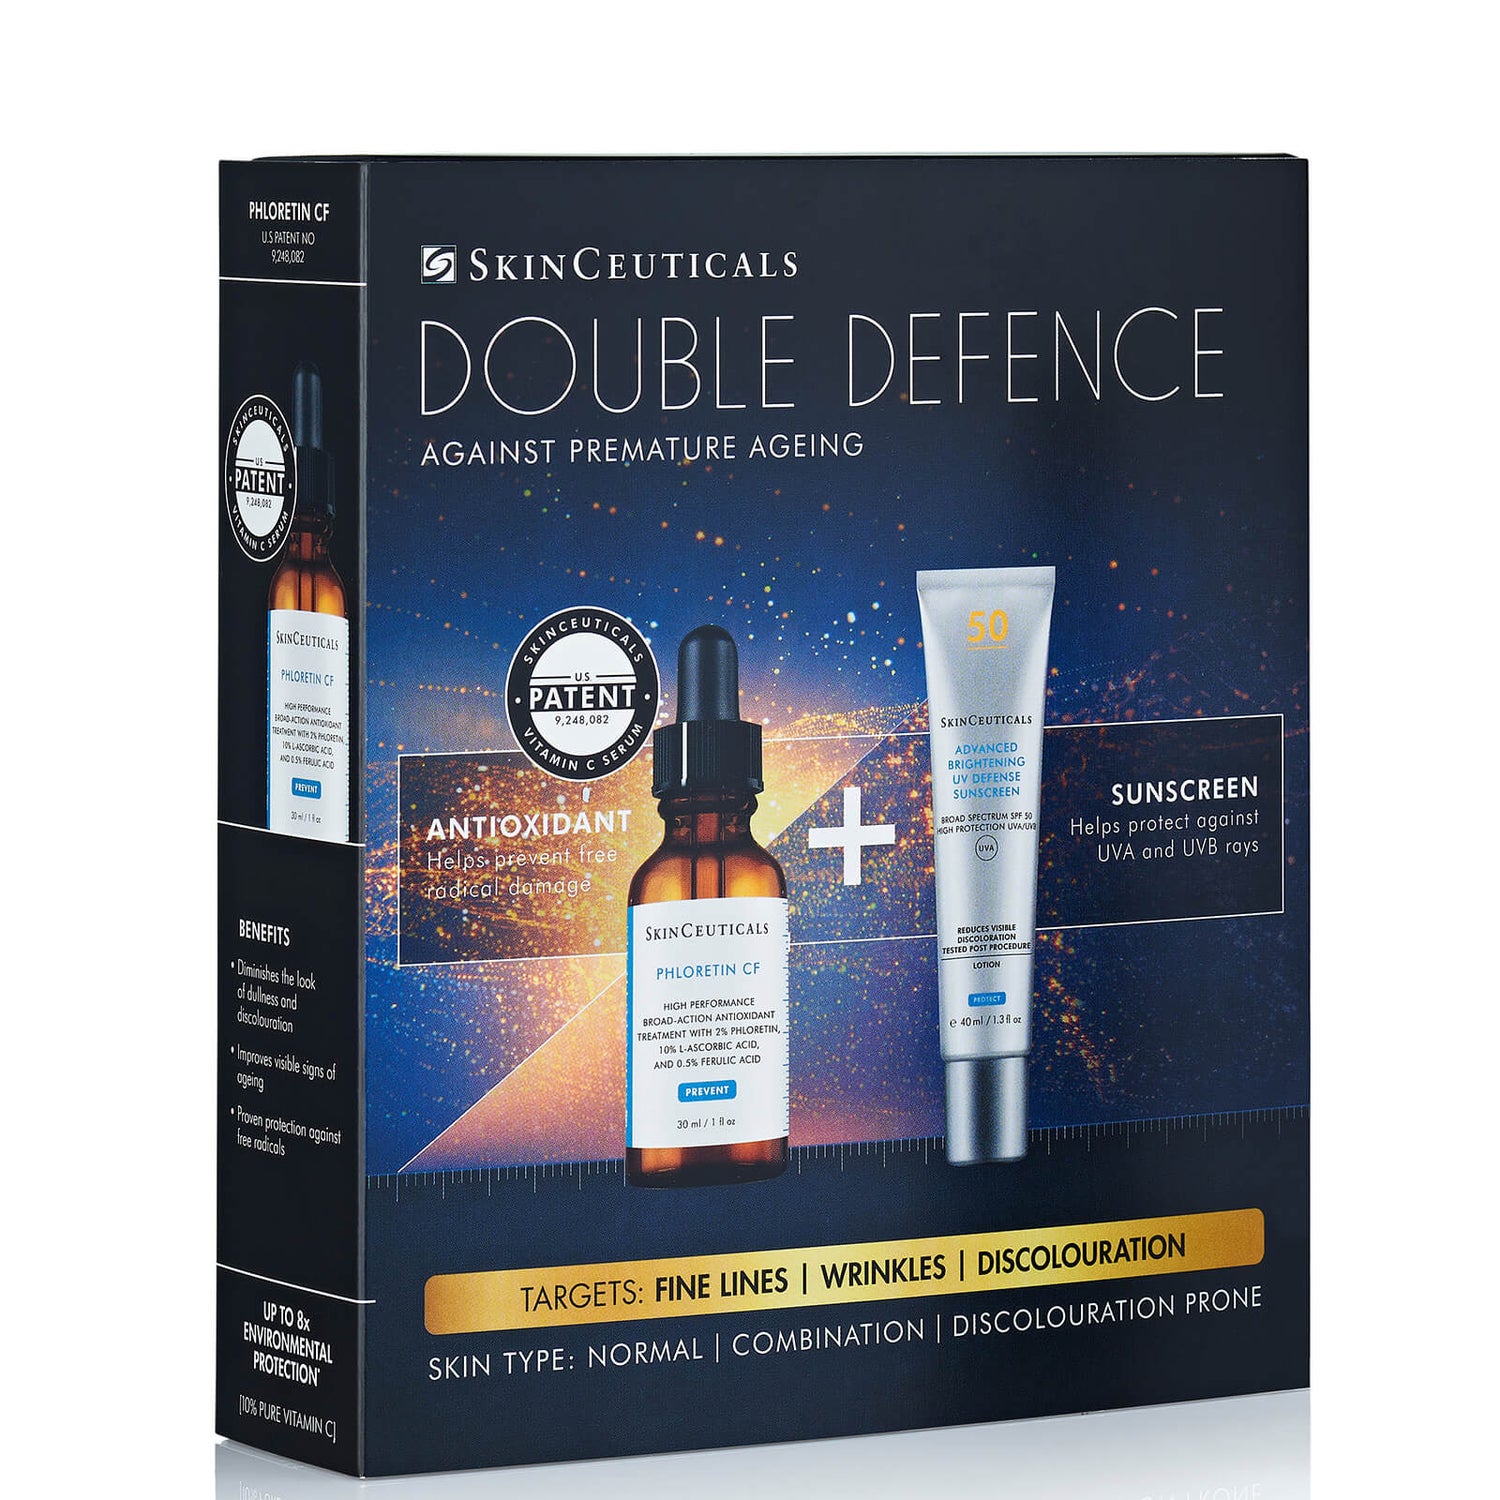 SkinCeuticals Double Defence Phloretin CF Kit for Combination, Discolouration-Prone Skin (Worth £195.00)